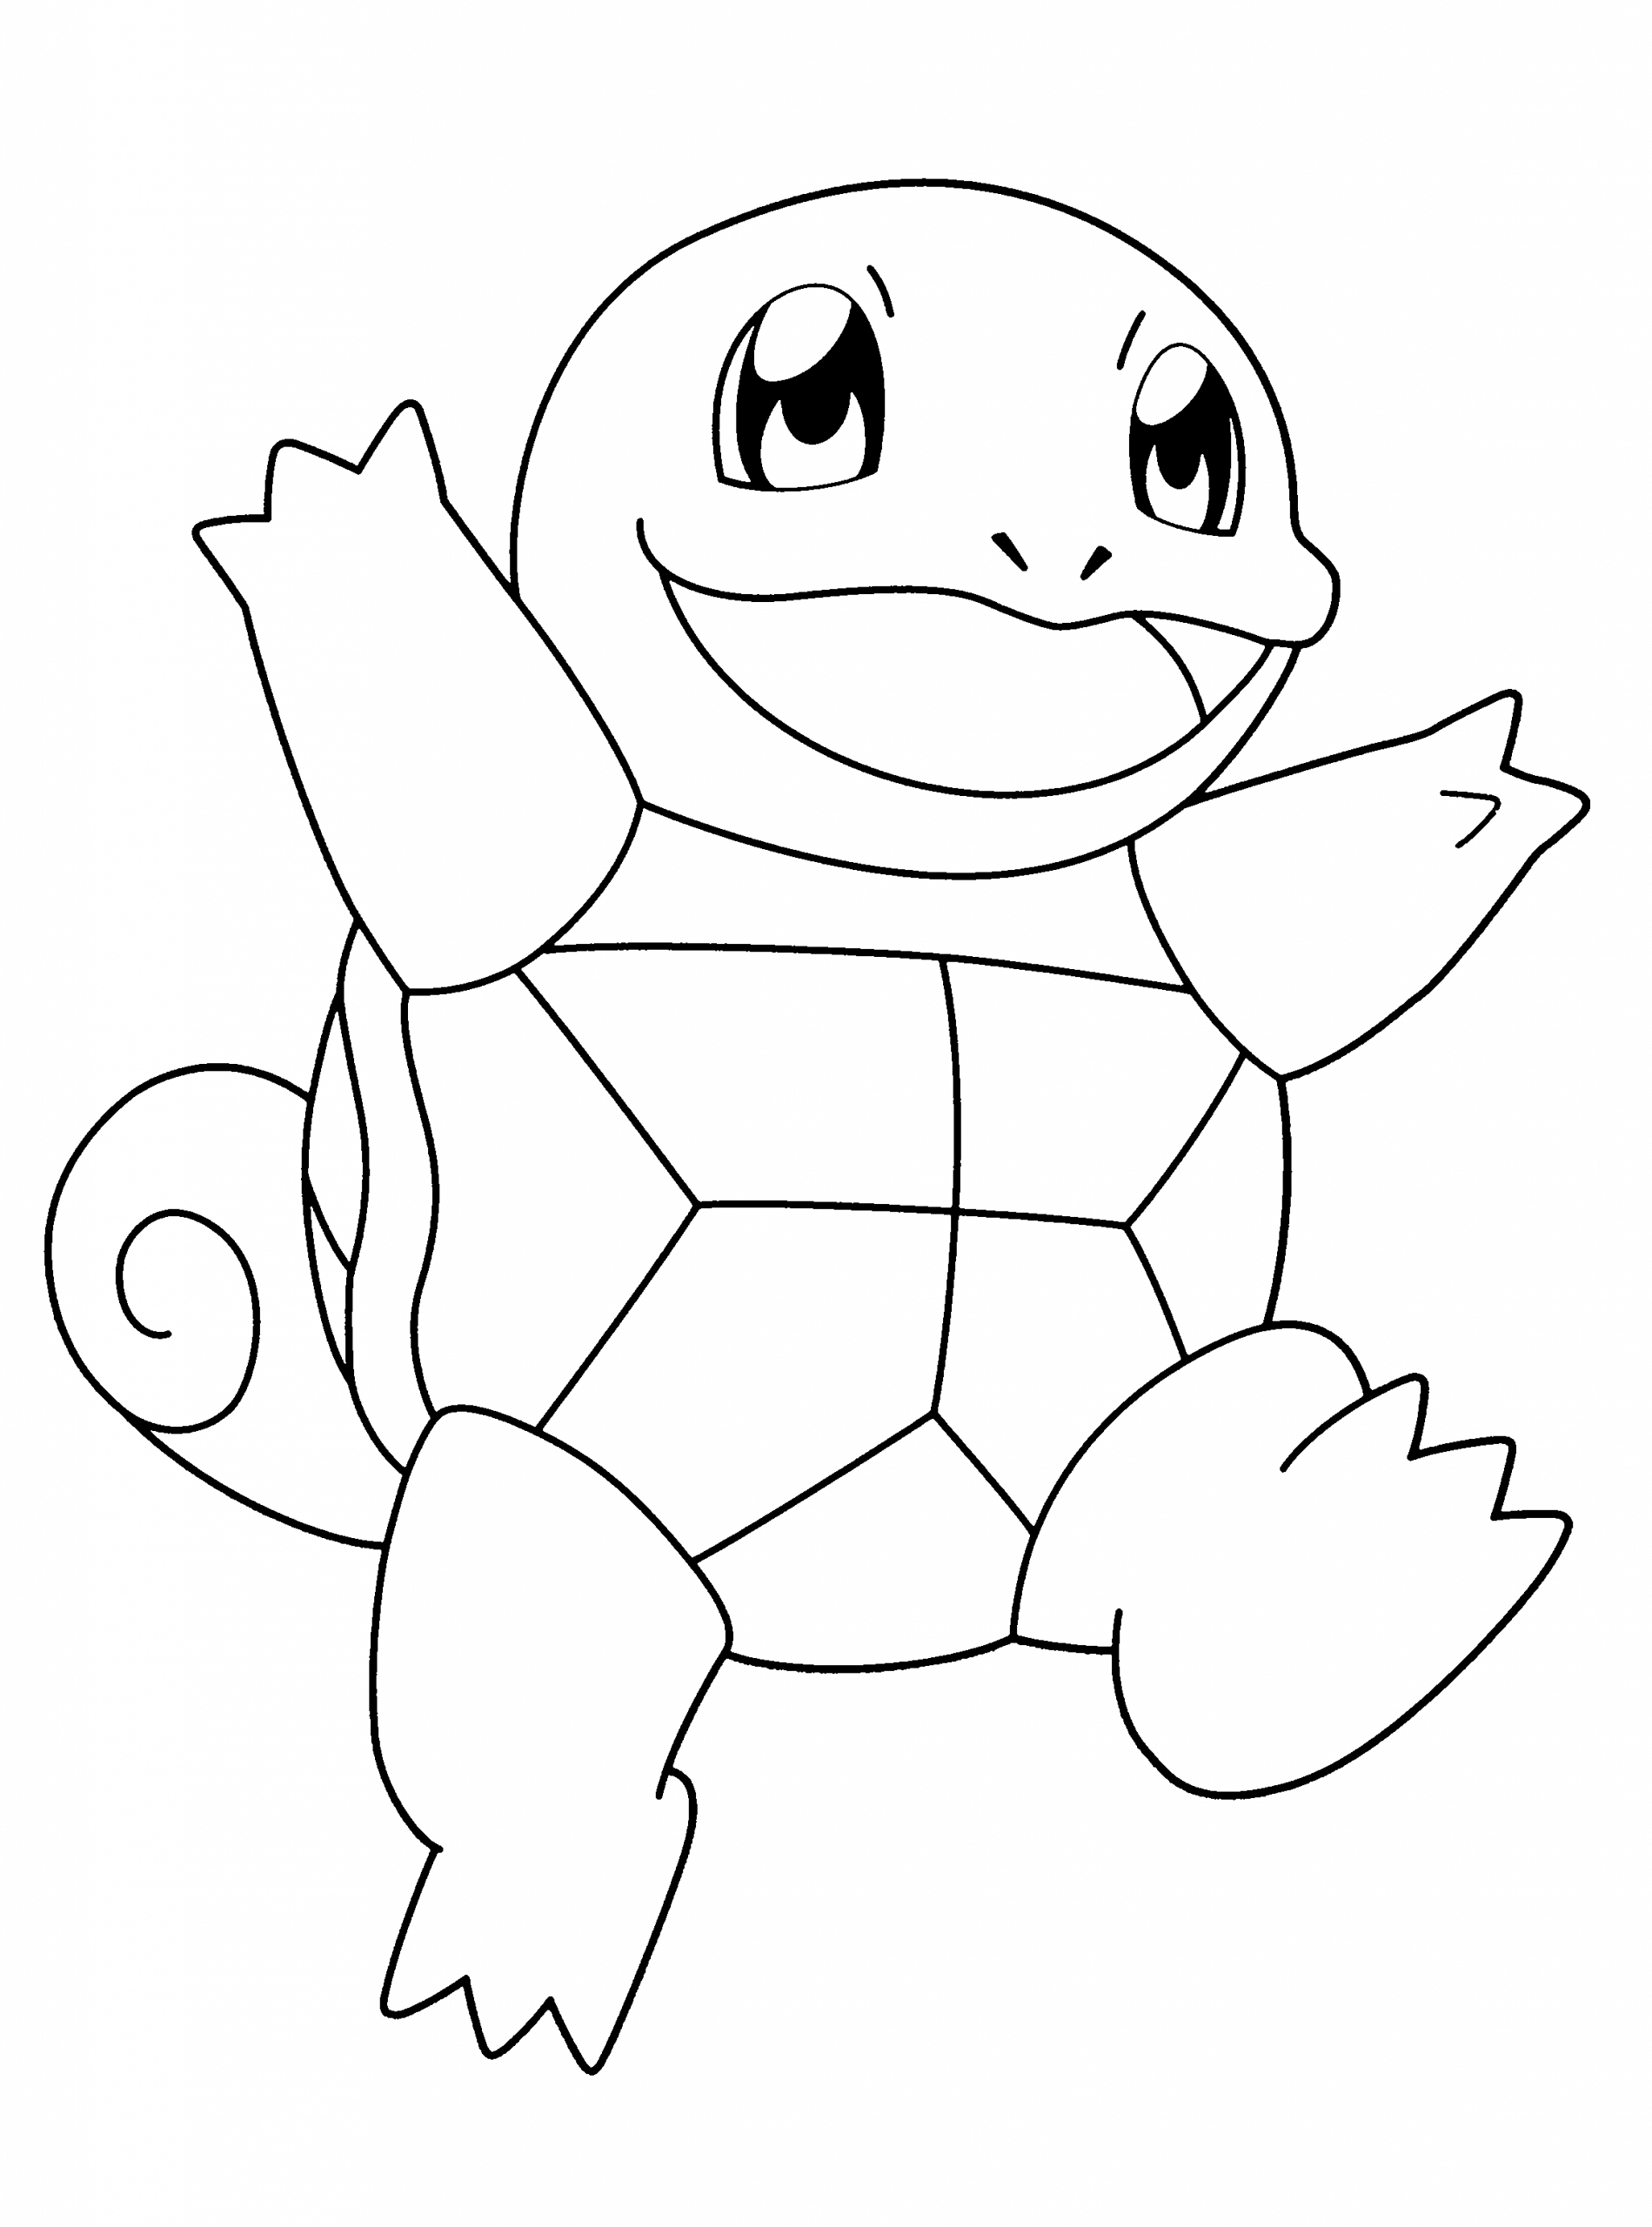 Pokemon to color for kids